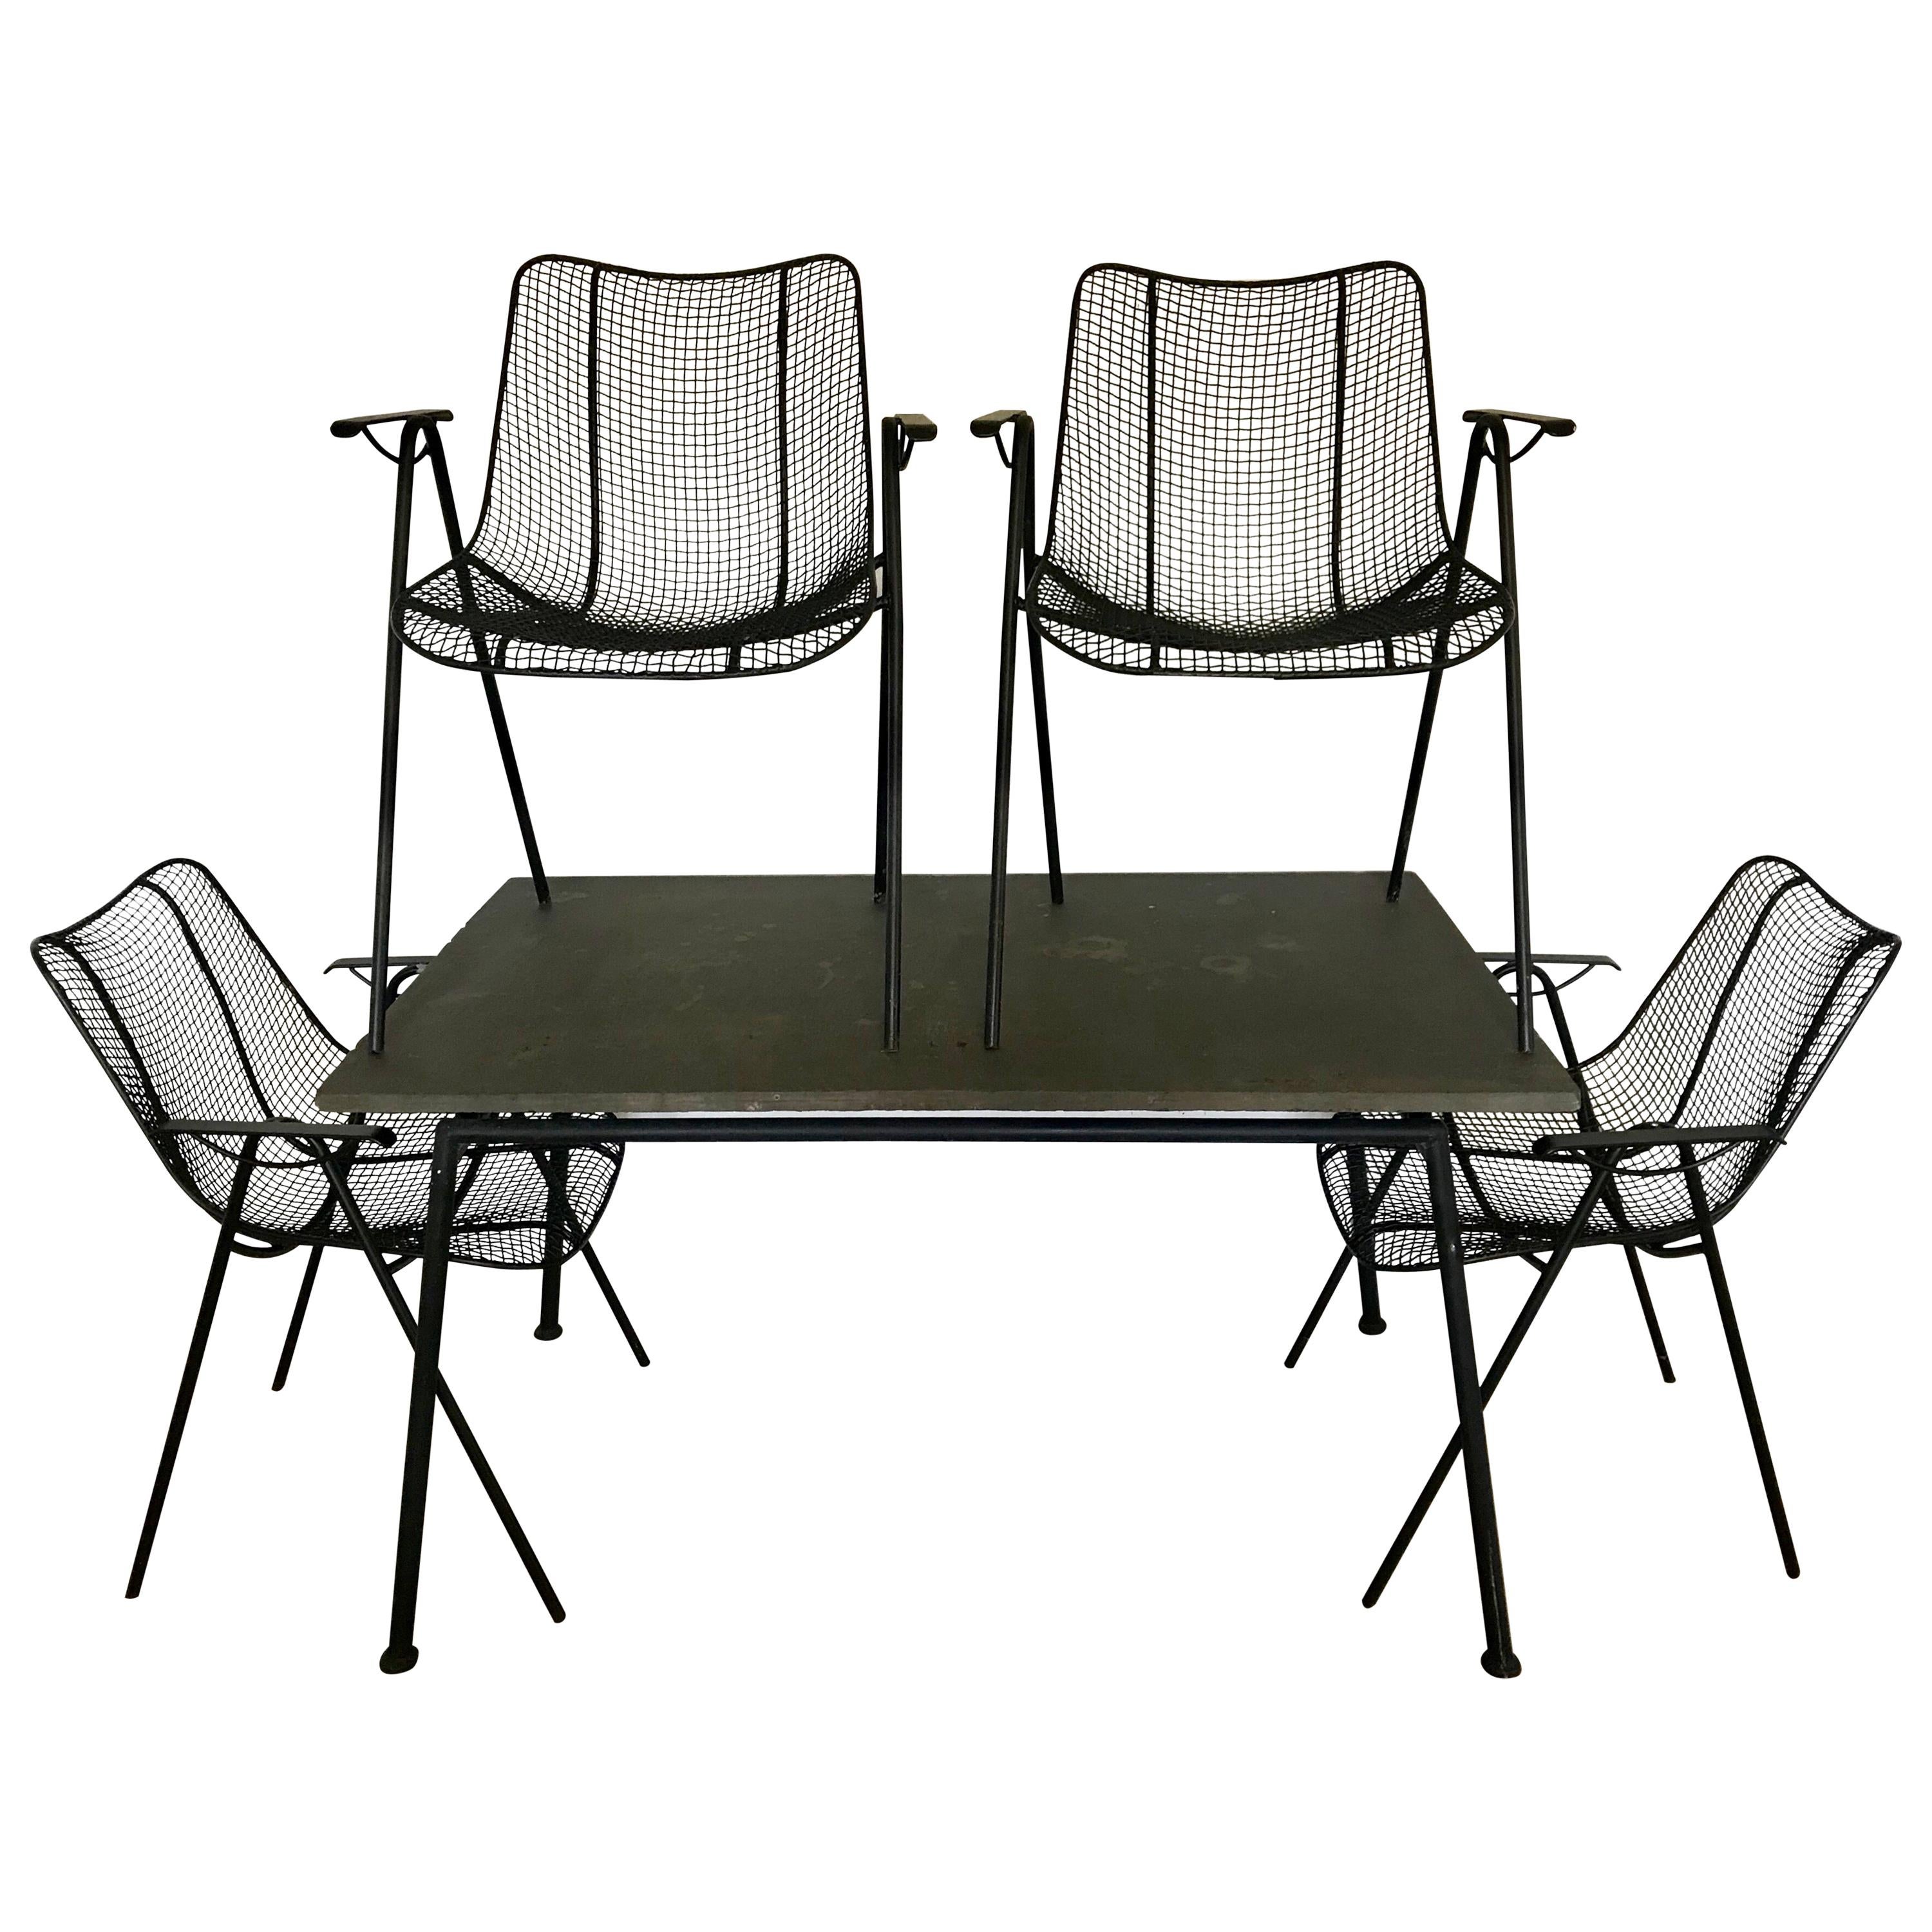 Mid Century Woodard Slate Top Patio Table with Four Wrought Iron Chairs, 1950s